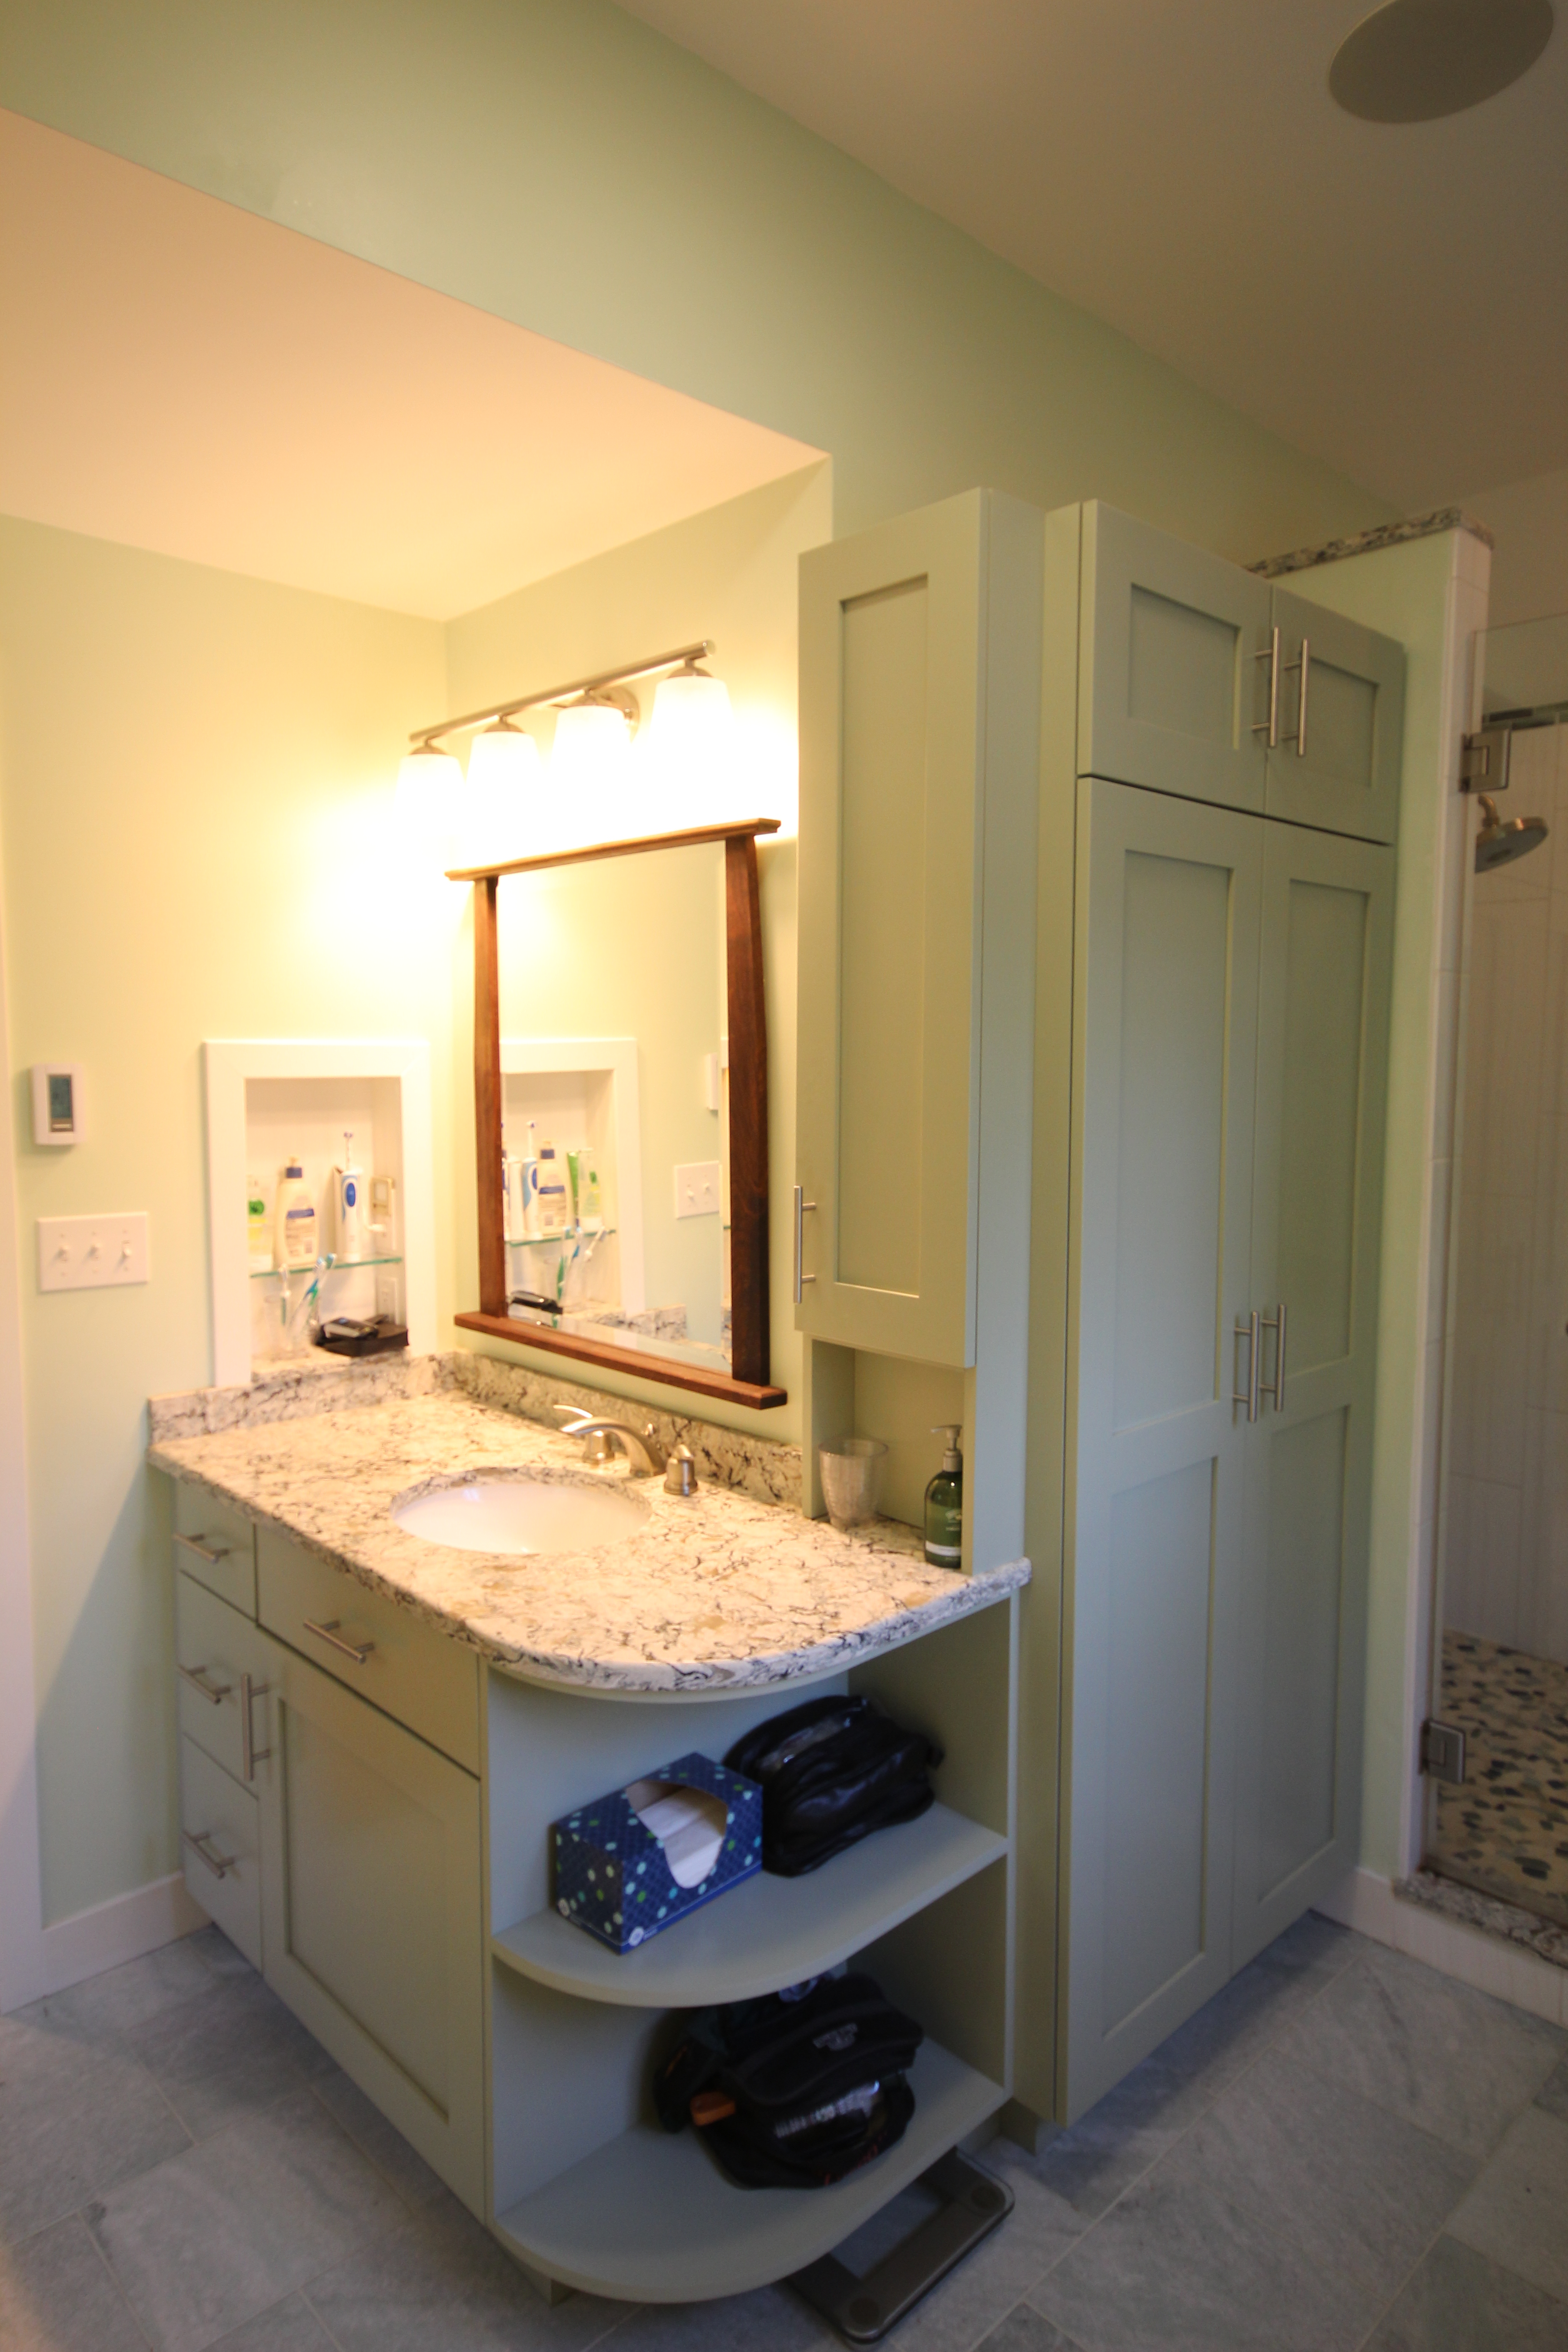 AFTER: CUSTOM DESIGNED ECO-FRIENDLY EXECUTIVE CABINETRY